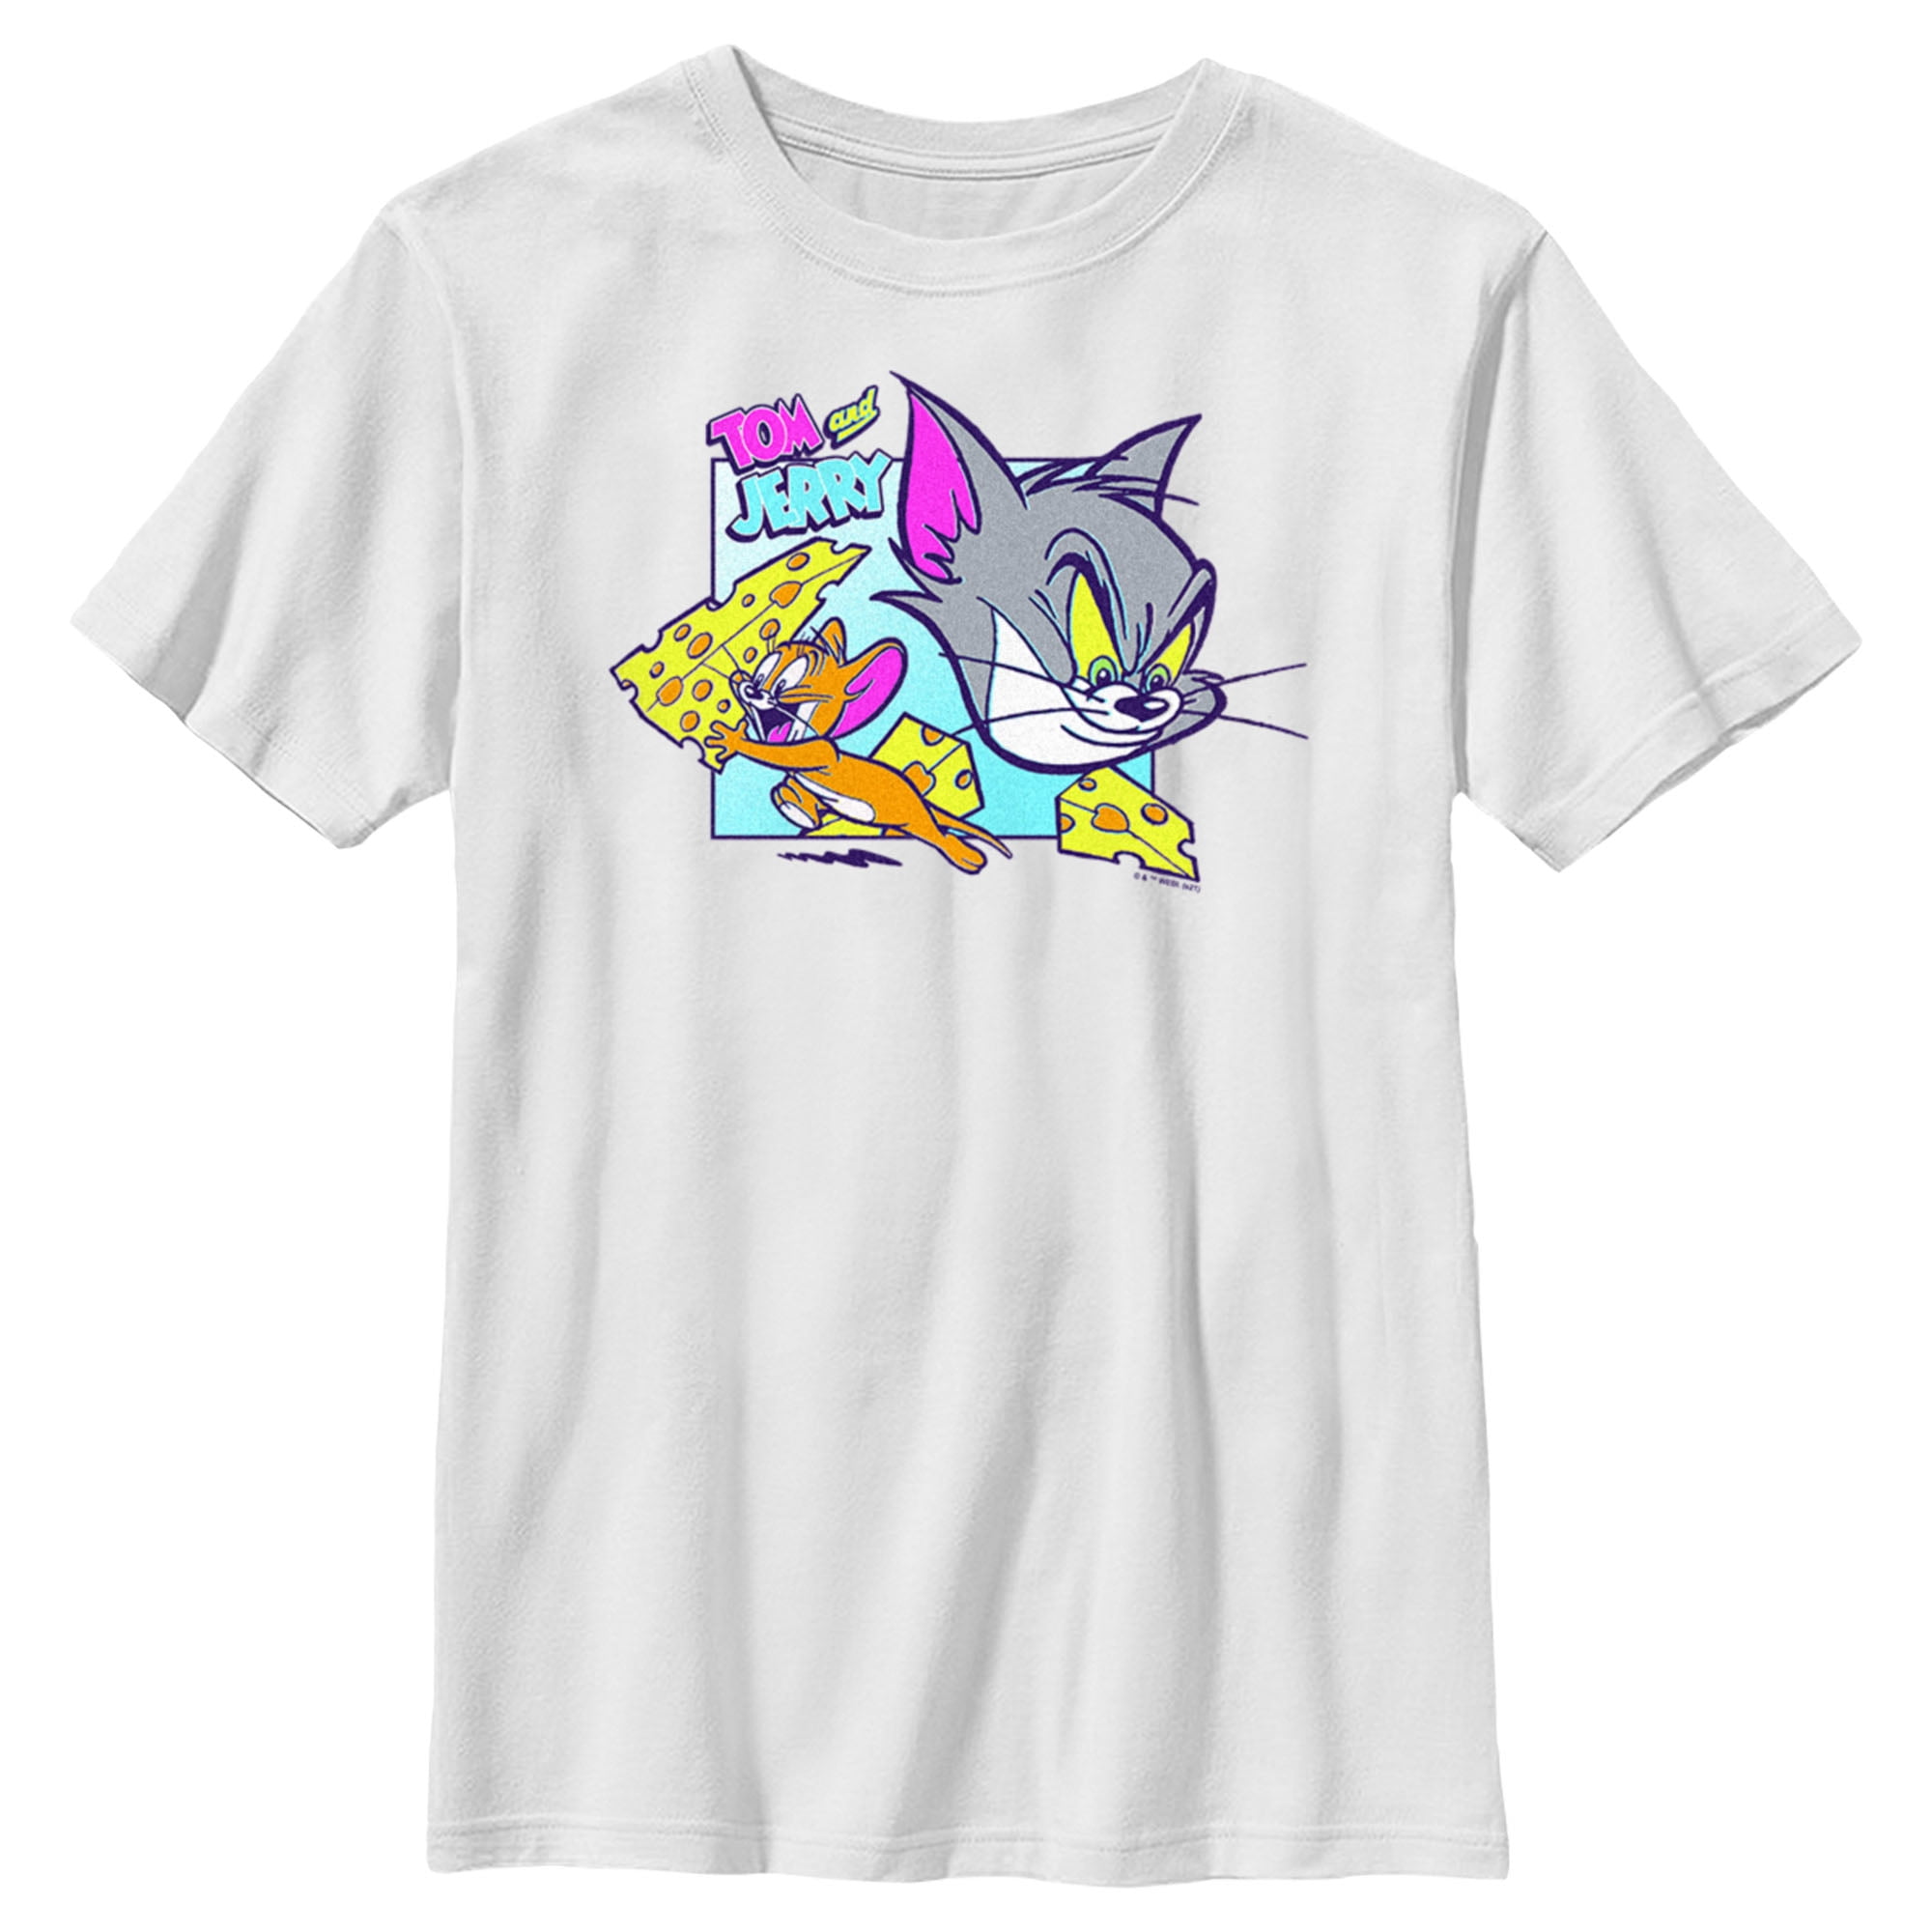 Boy's Tom and Jerry The Chase for Cheese Graphic Tee White Medium